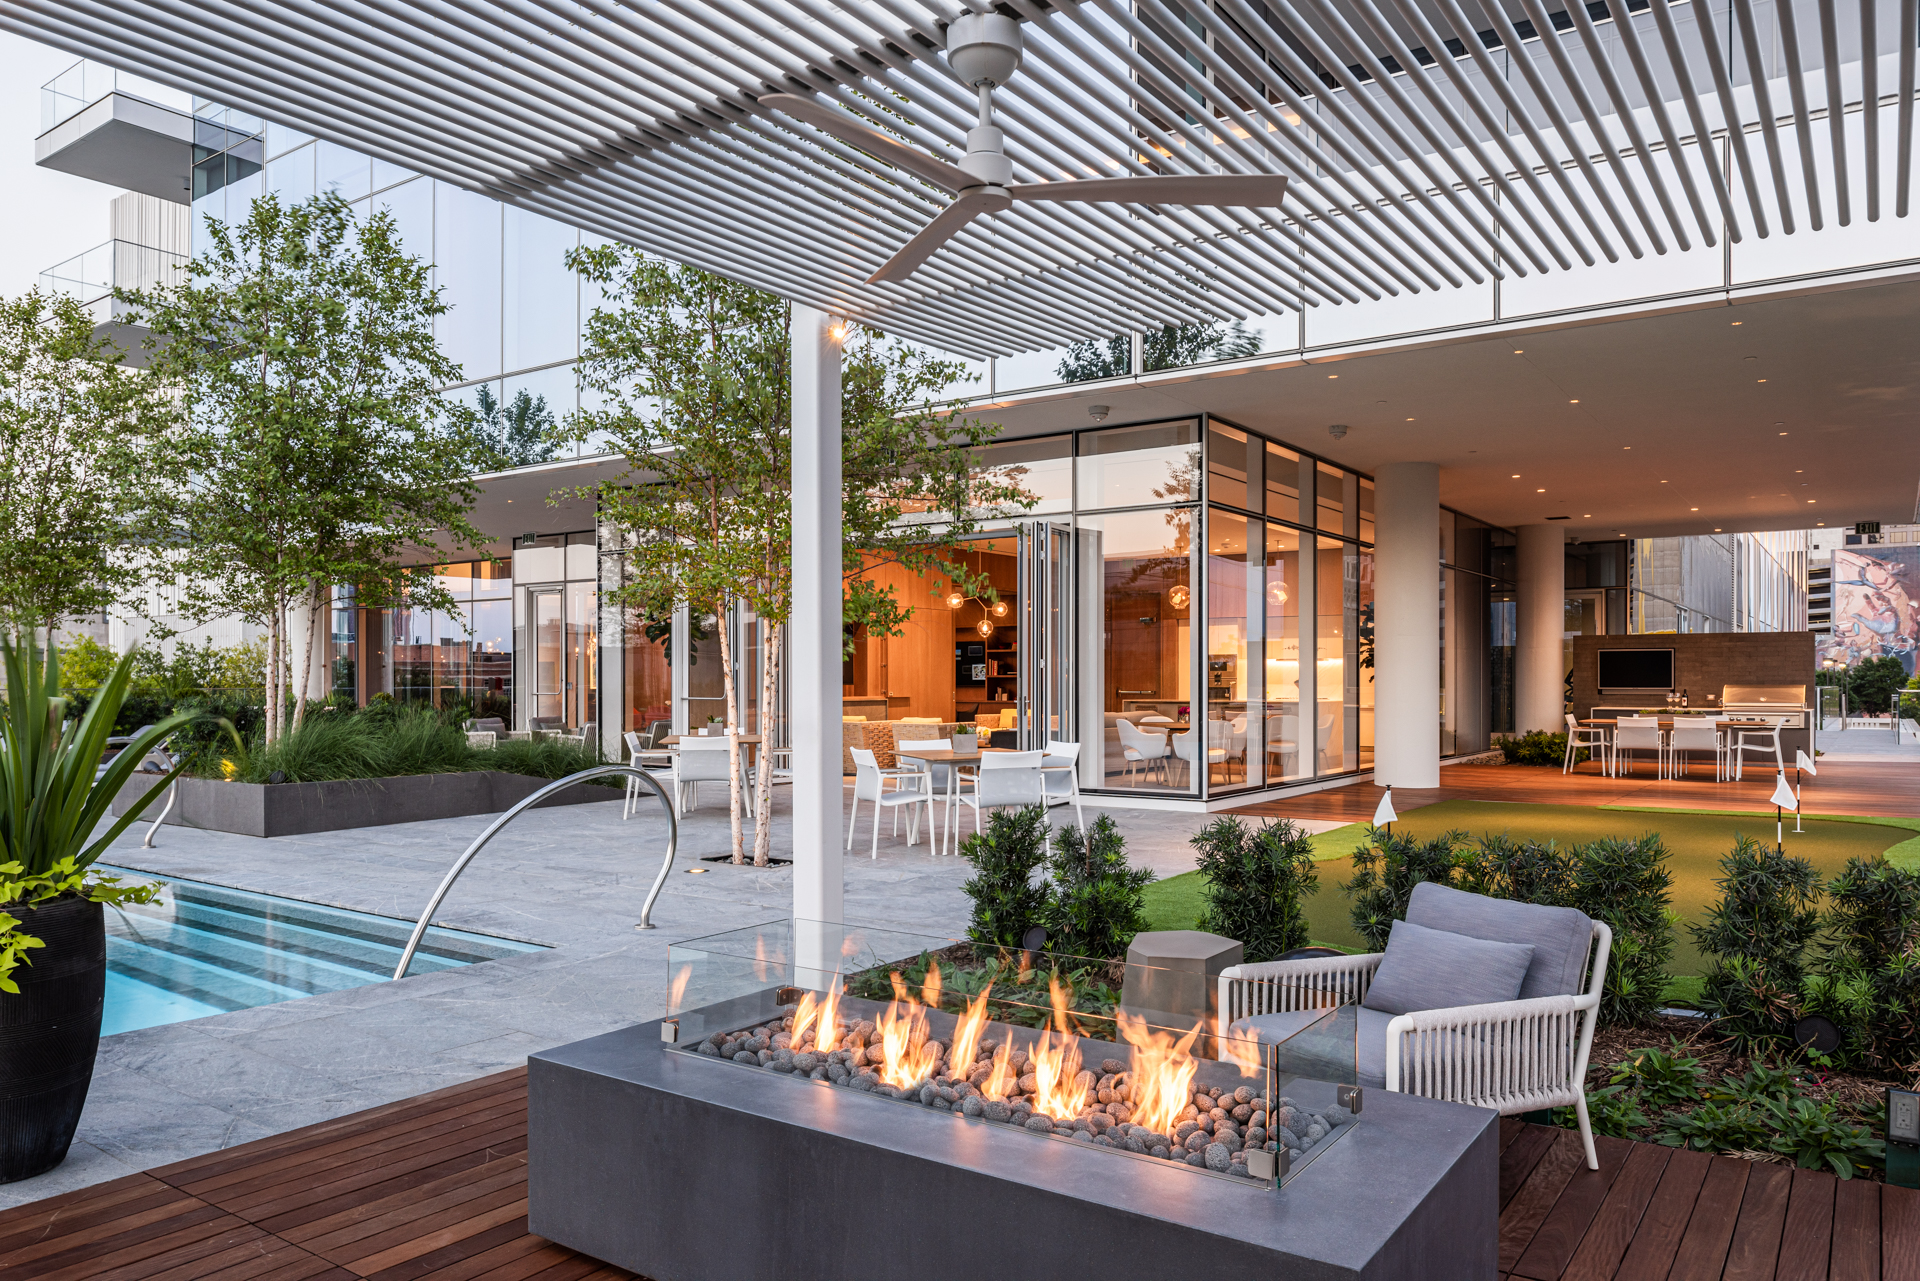 Amenity deck with modern fire pit, grill, and pool.